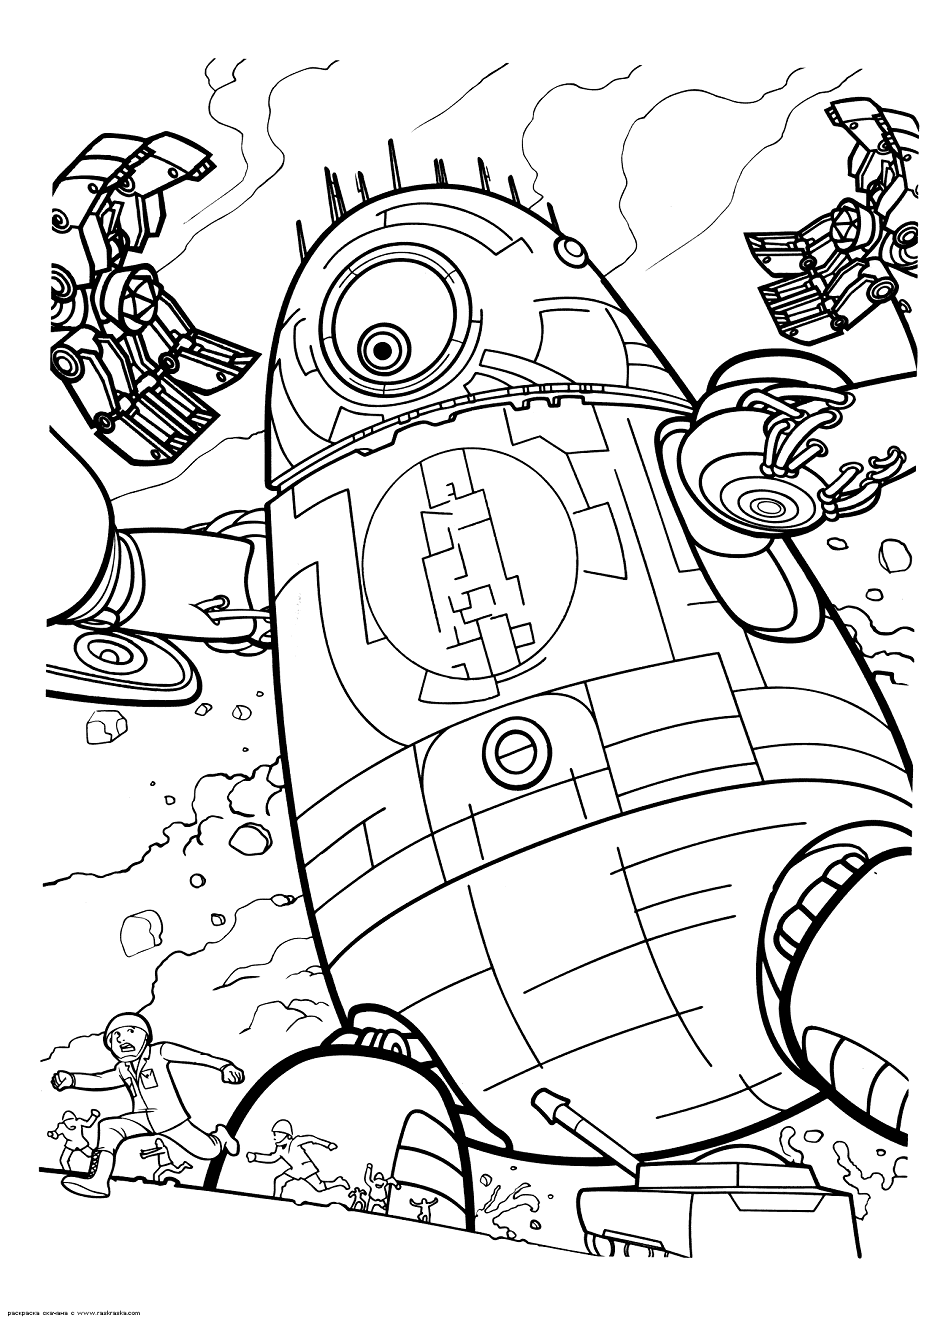 Huge robot Coloring Pages